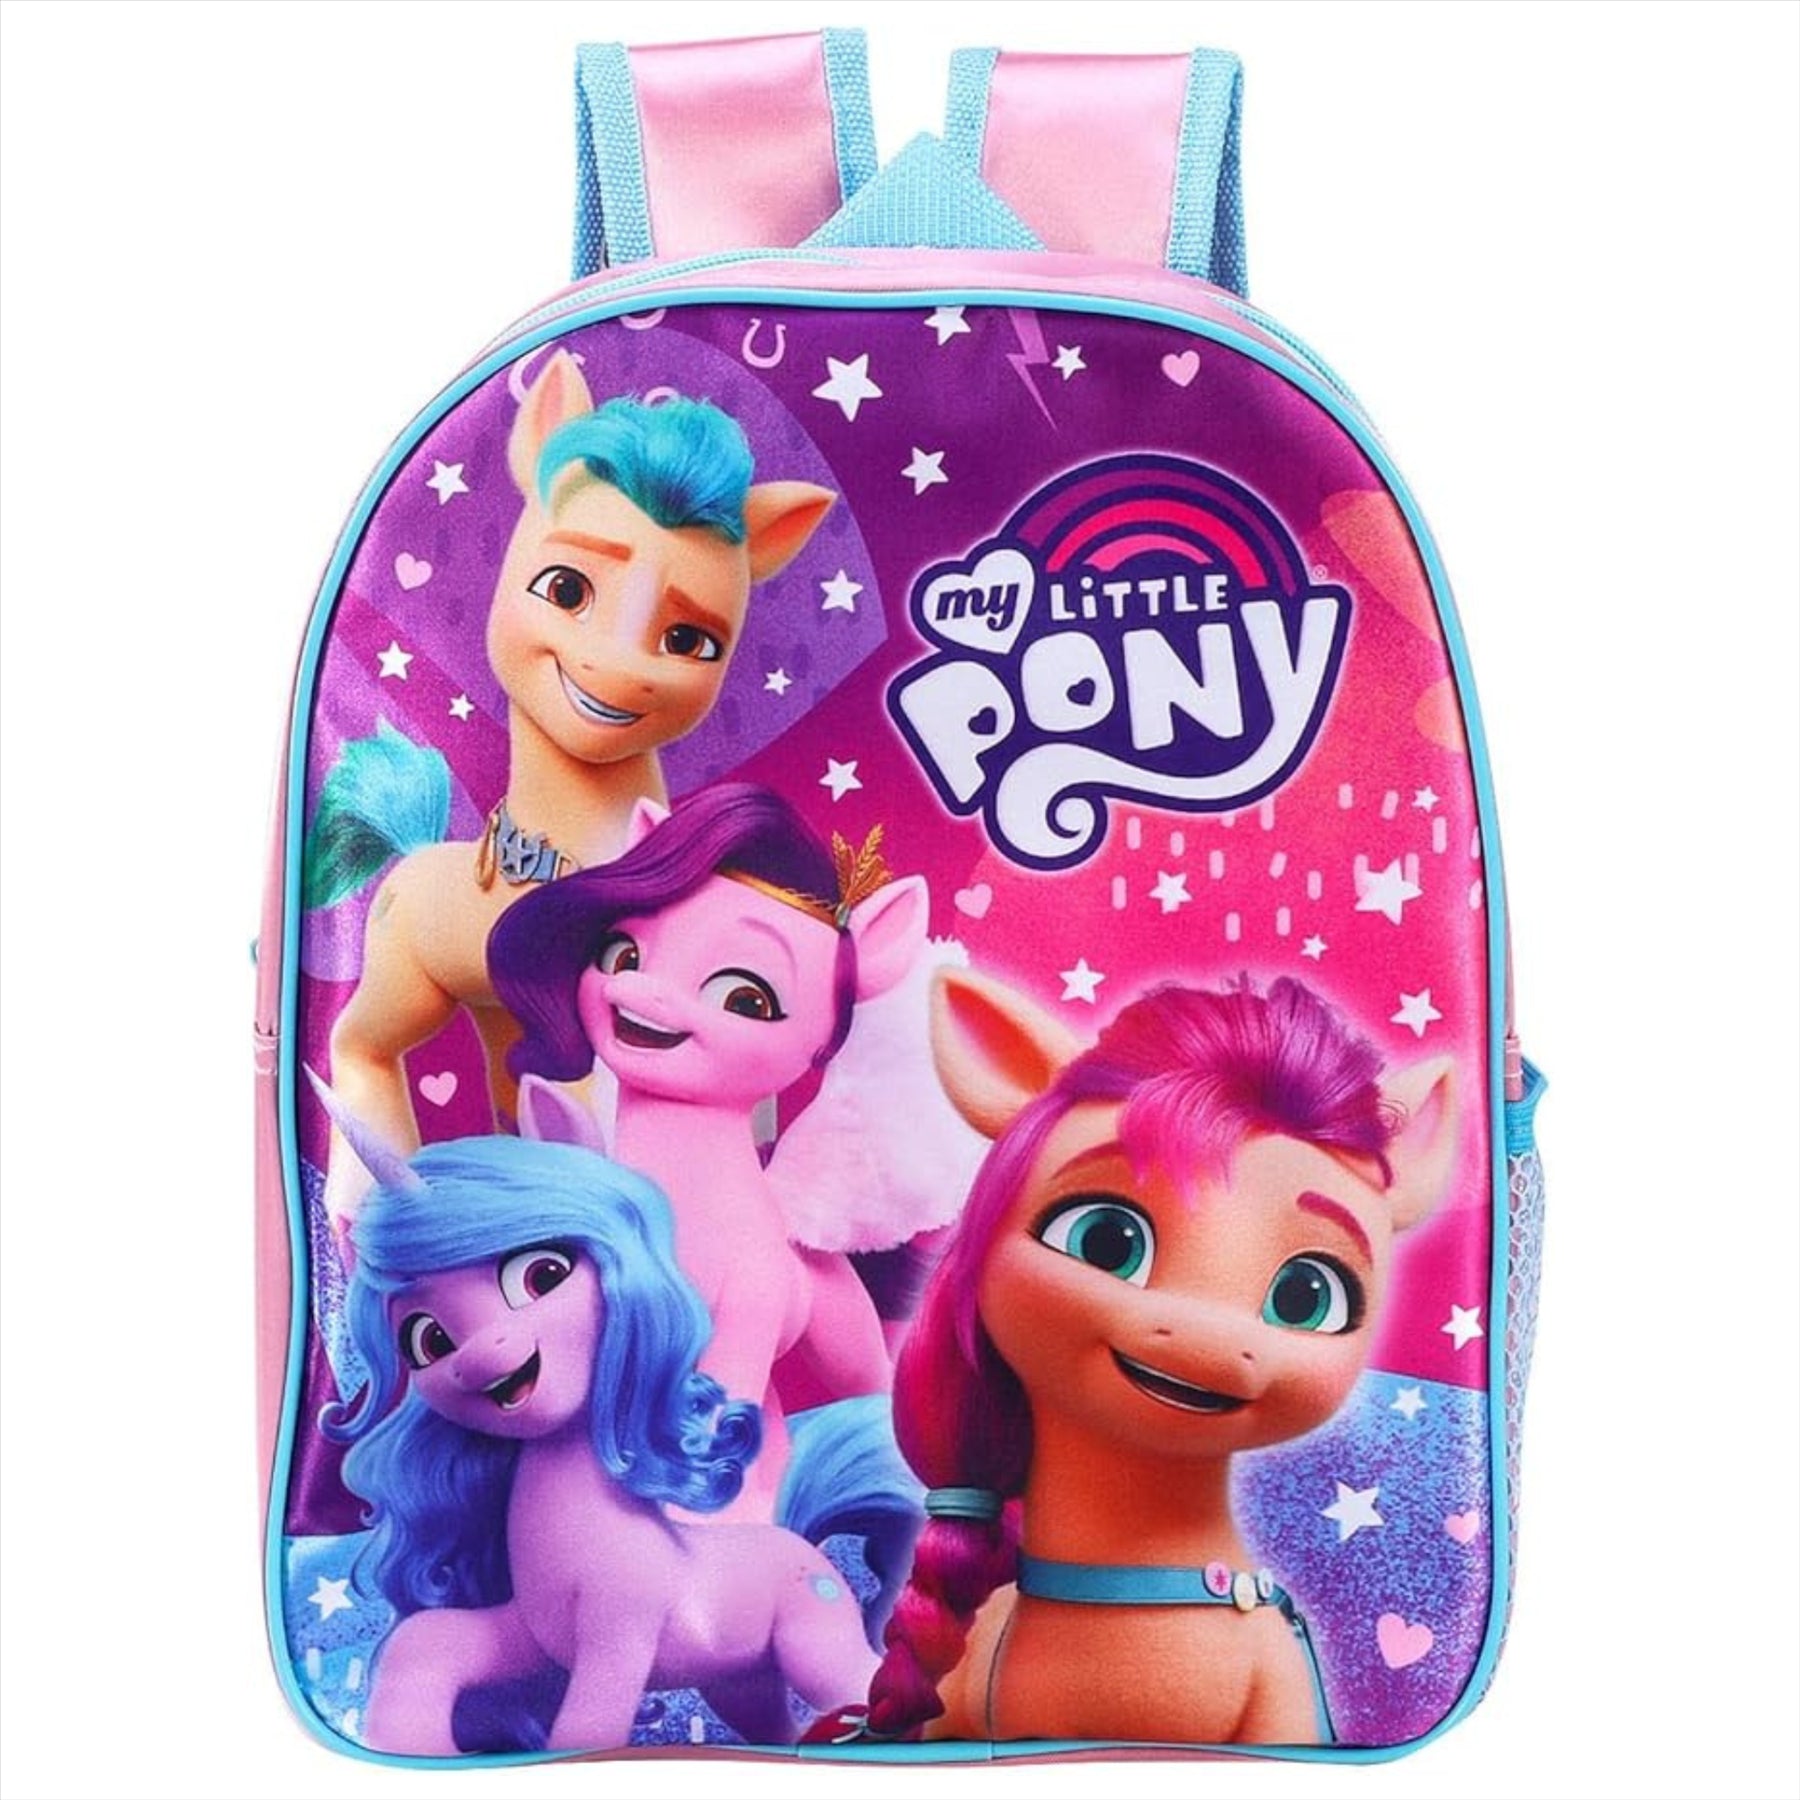 My Little Pony 3-Pack School Bundle - Backpack, Pencil Case, and Water Bottle - Toptoys2u